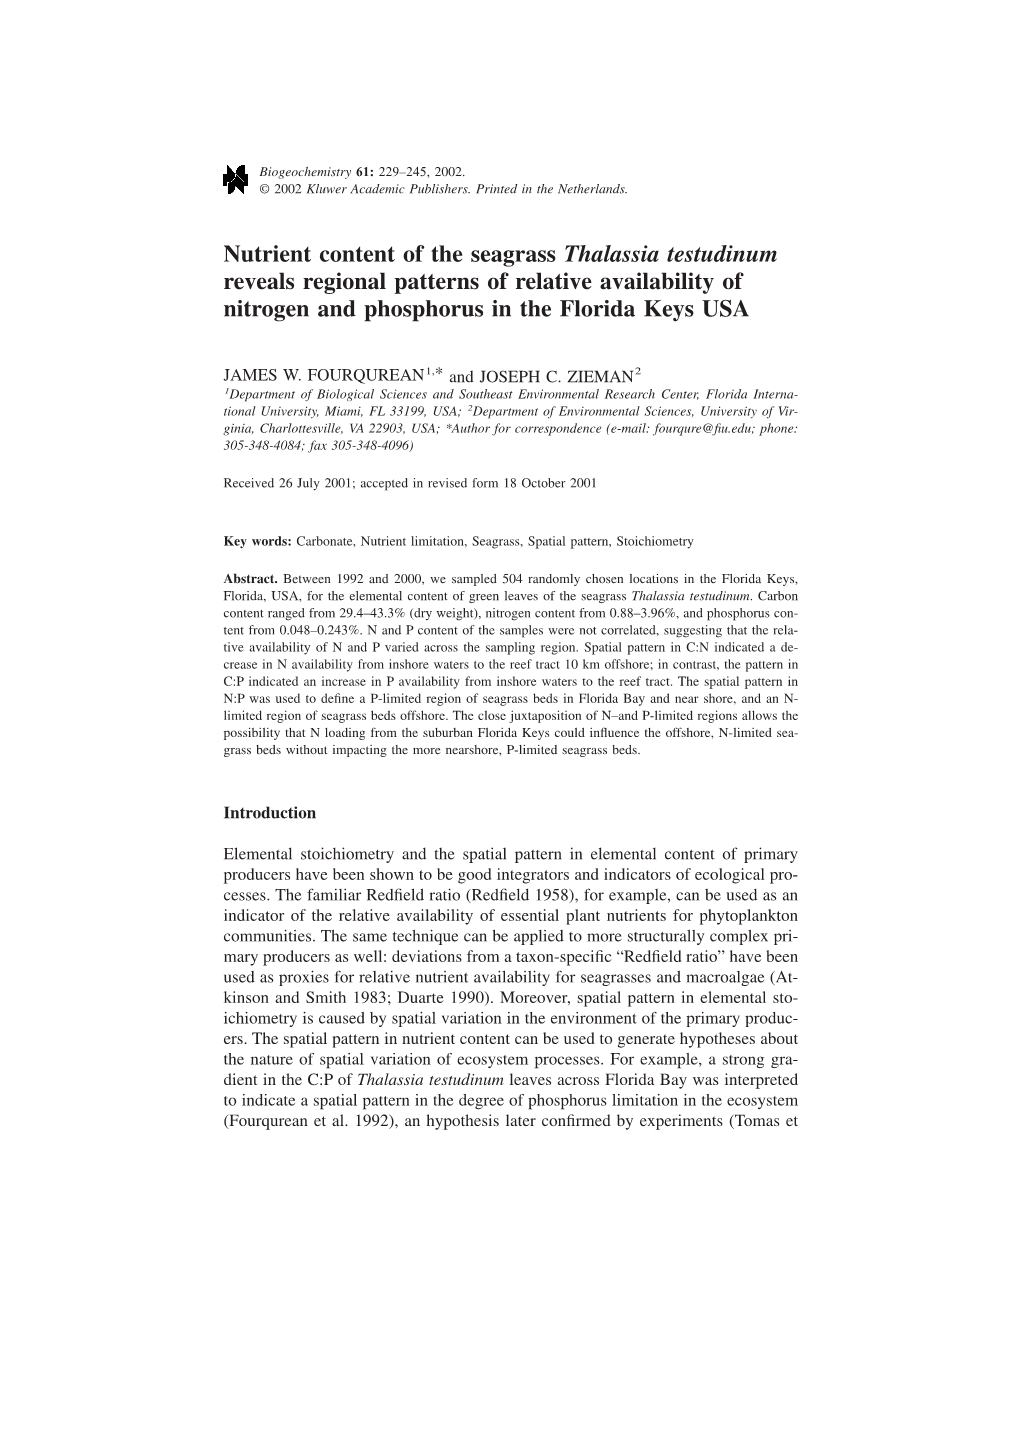 Nutrient Content of the Seagrass Thalassia Testudinum Reveals Regional Patterns of Relative Availability of Nitrogen and Phosphorus in the Florida Keys USA